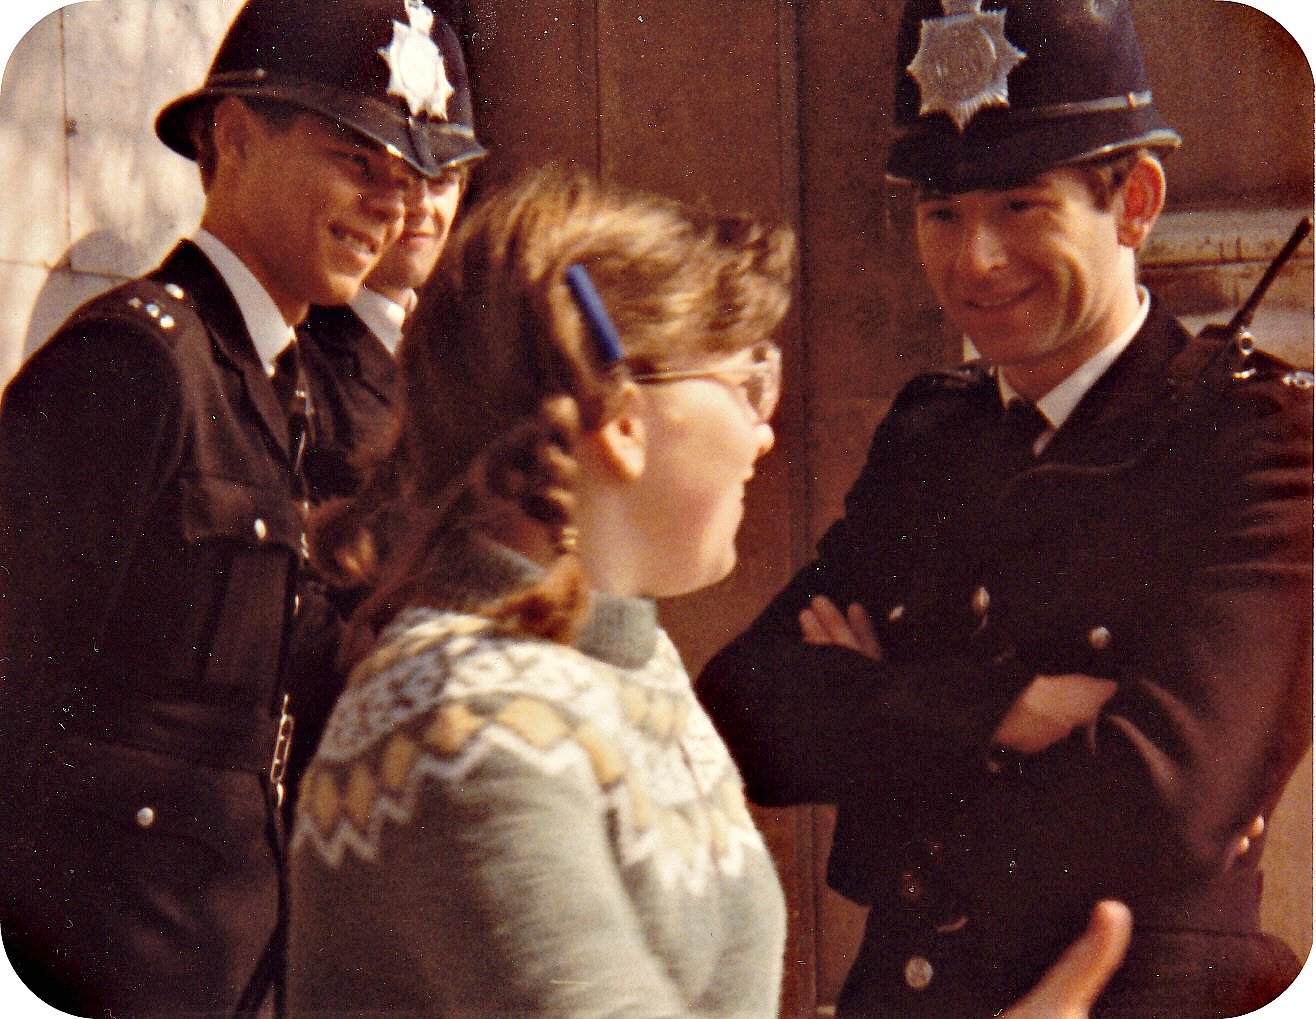 Annette sweet talking the Bobbies to pose for a photo with her during a short stop in London en route to Spain